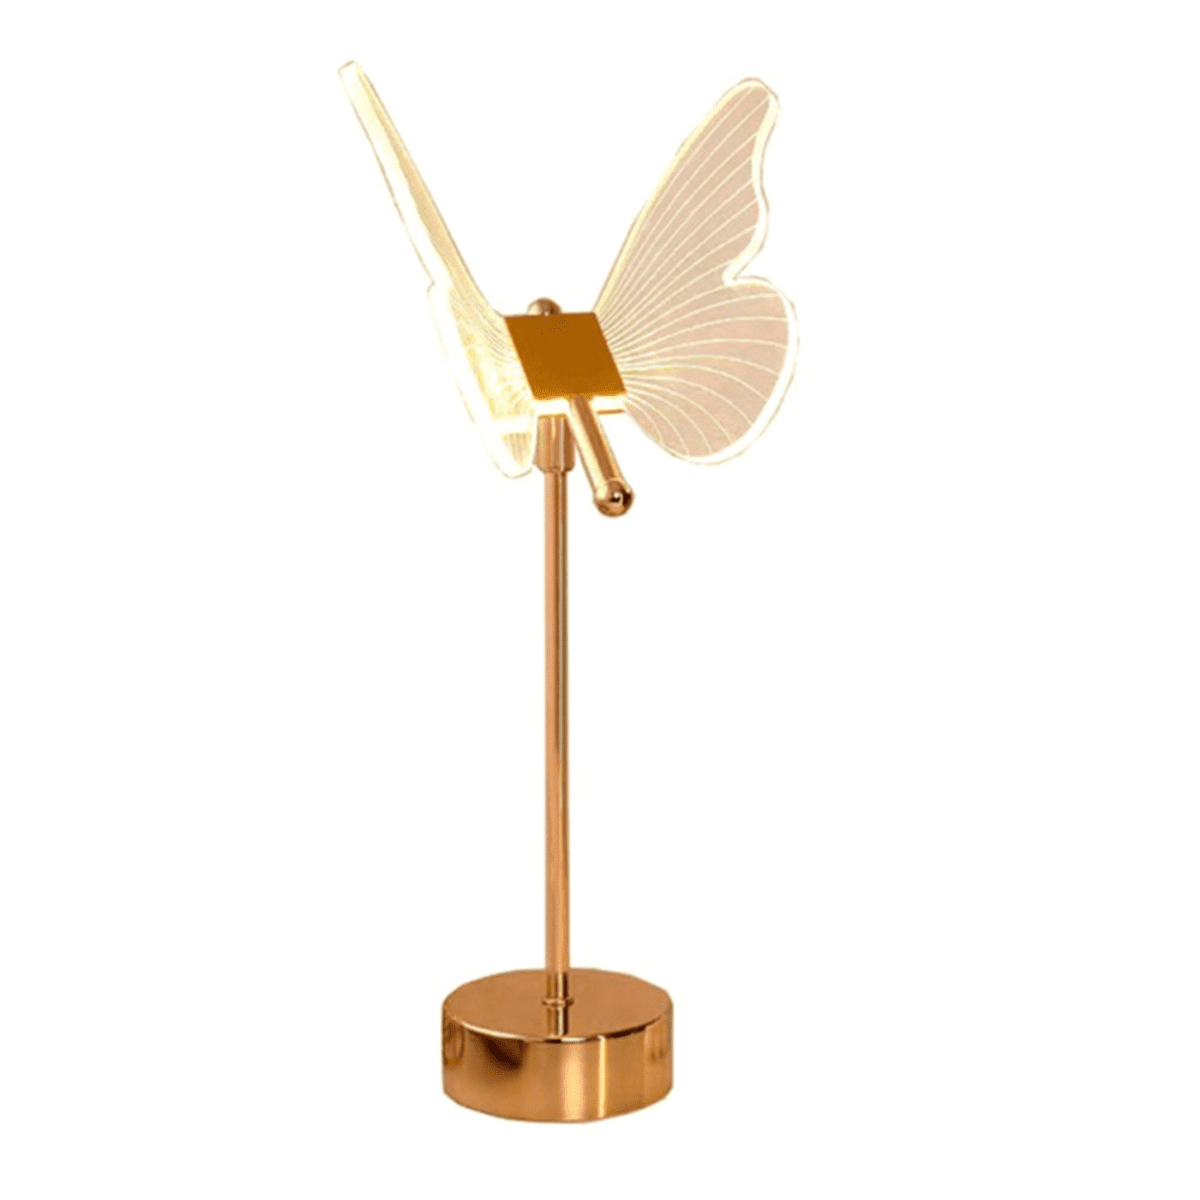 Butterfly LED Accent Lamp – USB Rechargeable